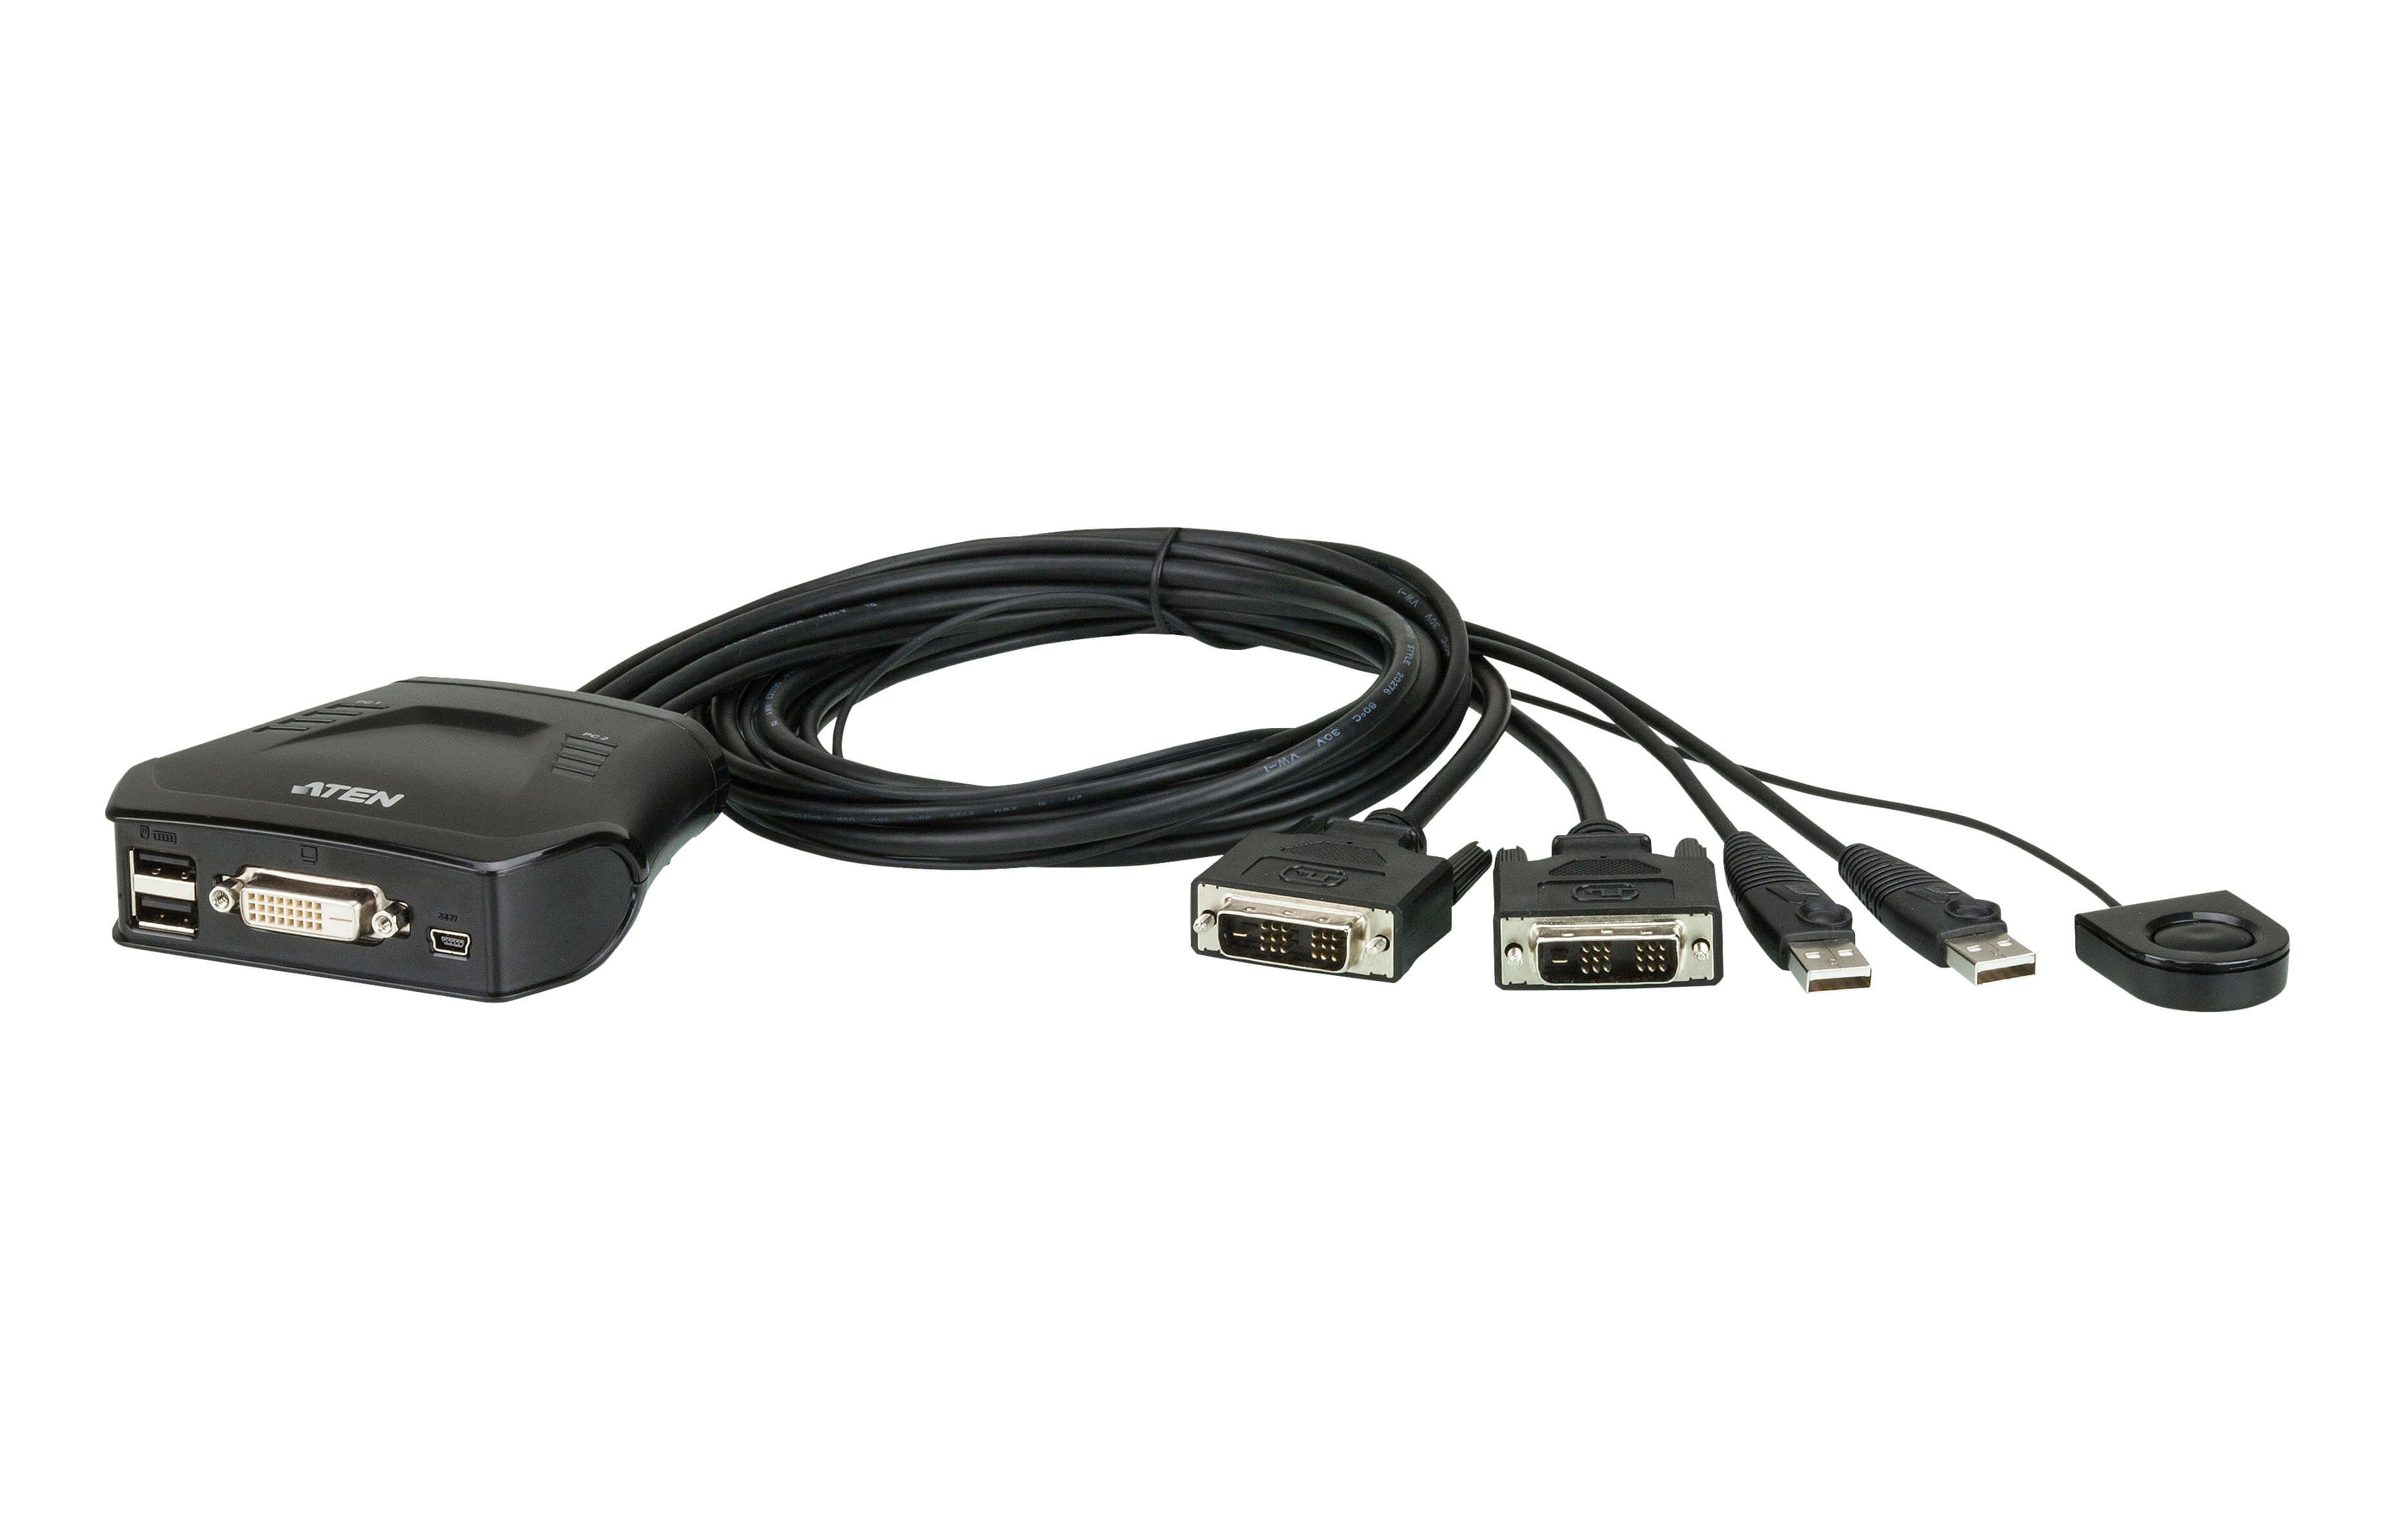 Aten Petite 2 Port USB DVI-D KVM Switch with Remote Port Selector - 1.2m Cables Built In